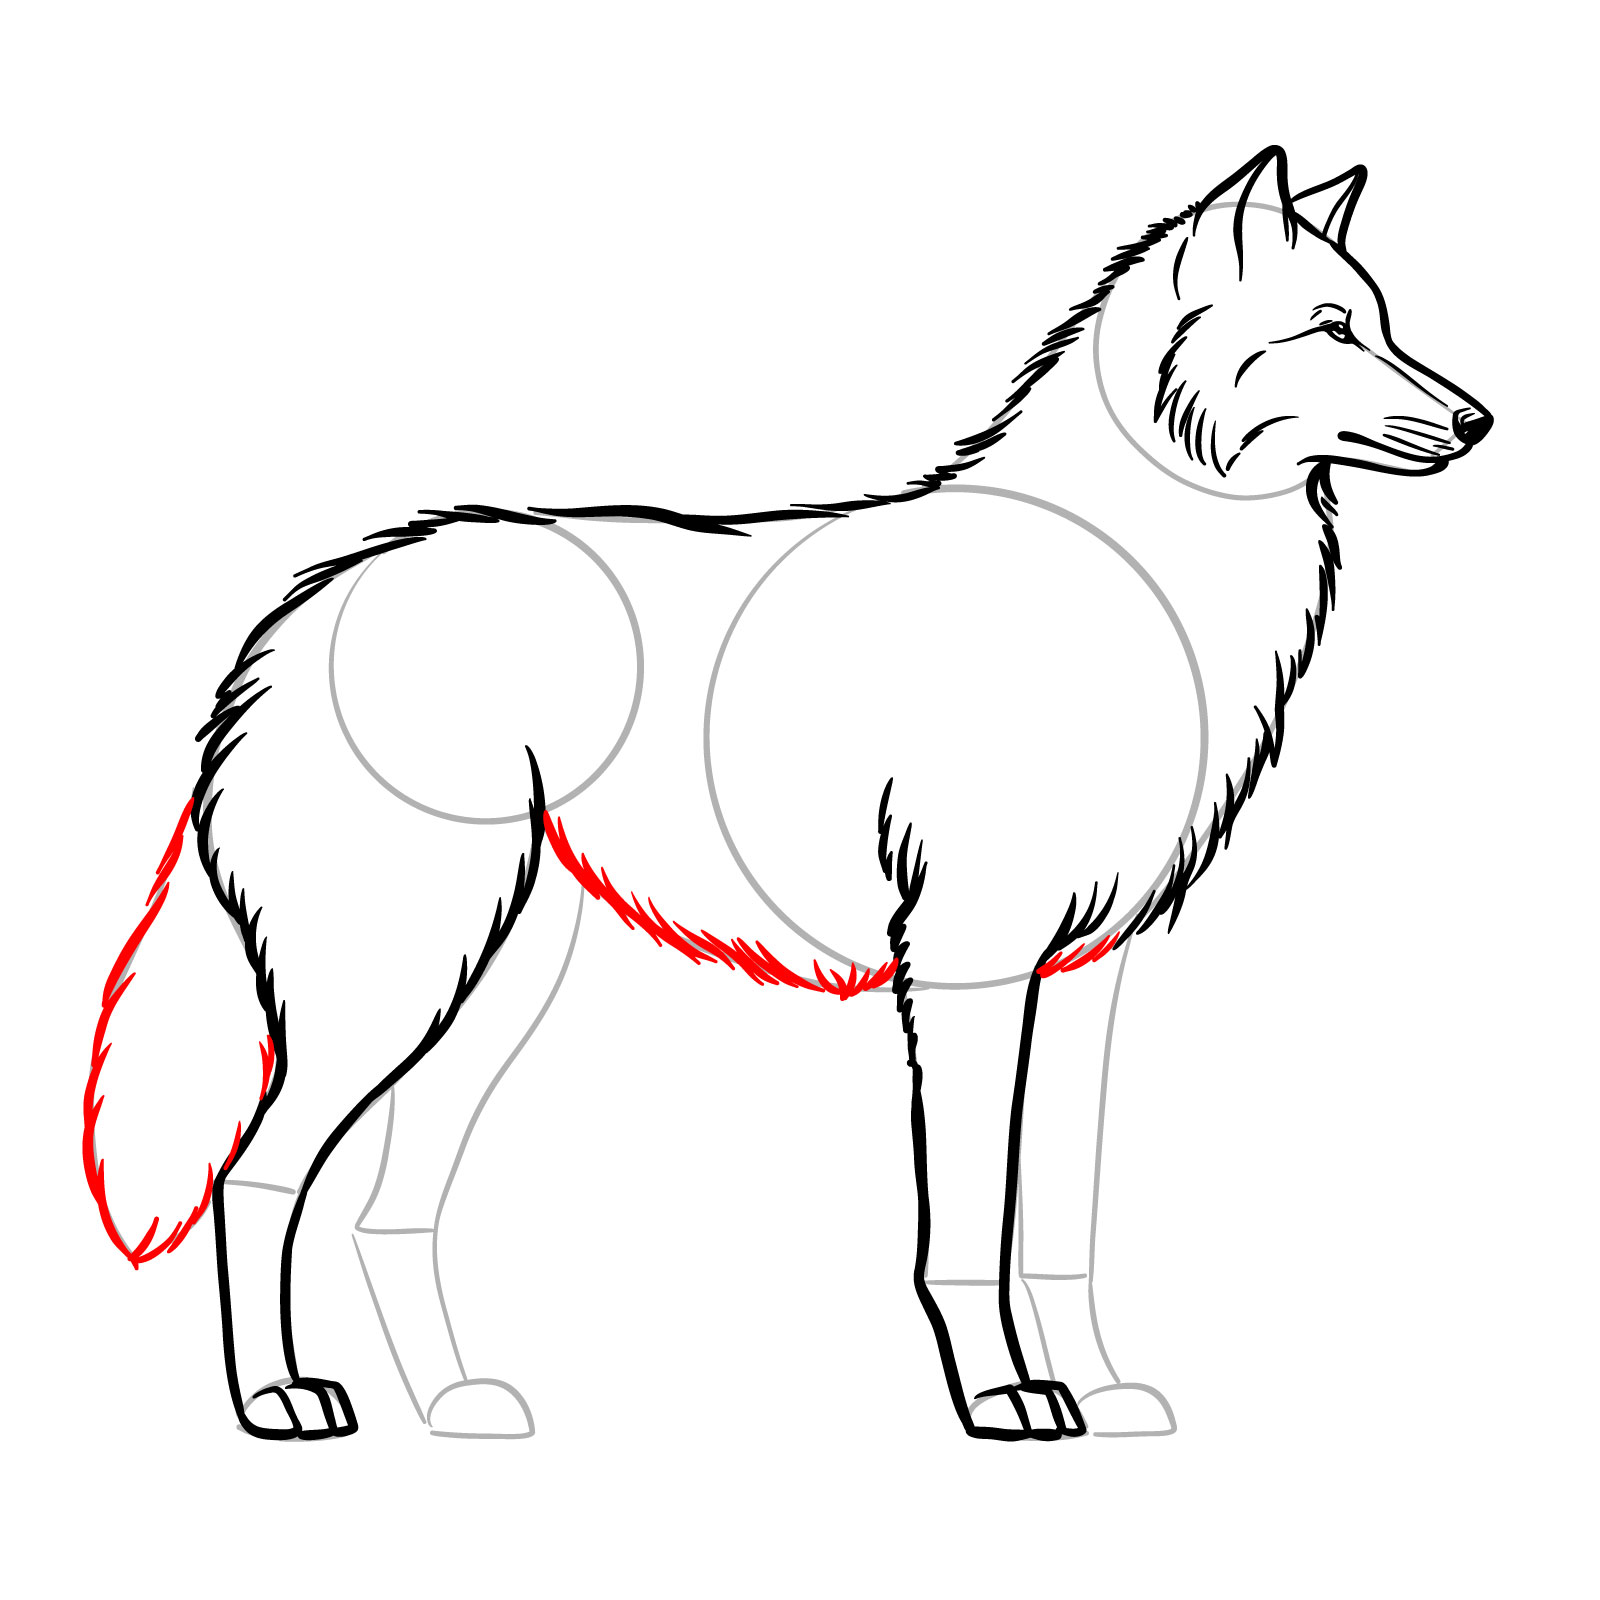 Detailing the wolf's underbelly and tail in a side view drawing - step 11